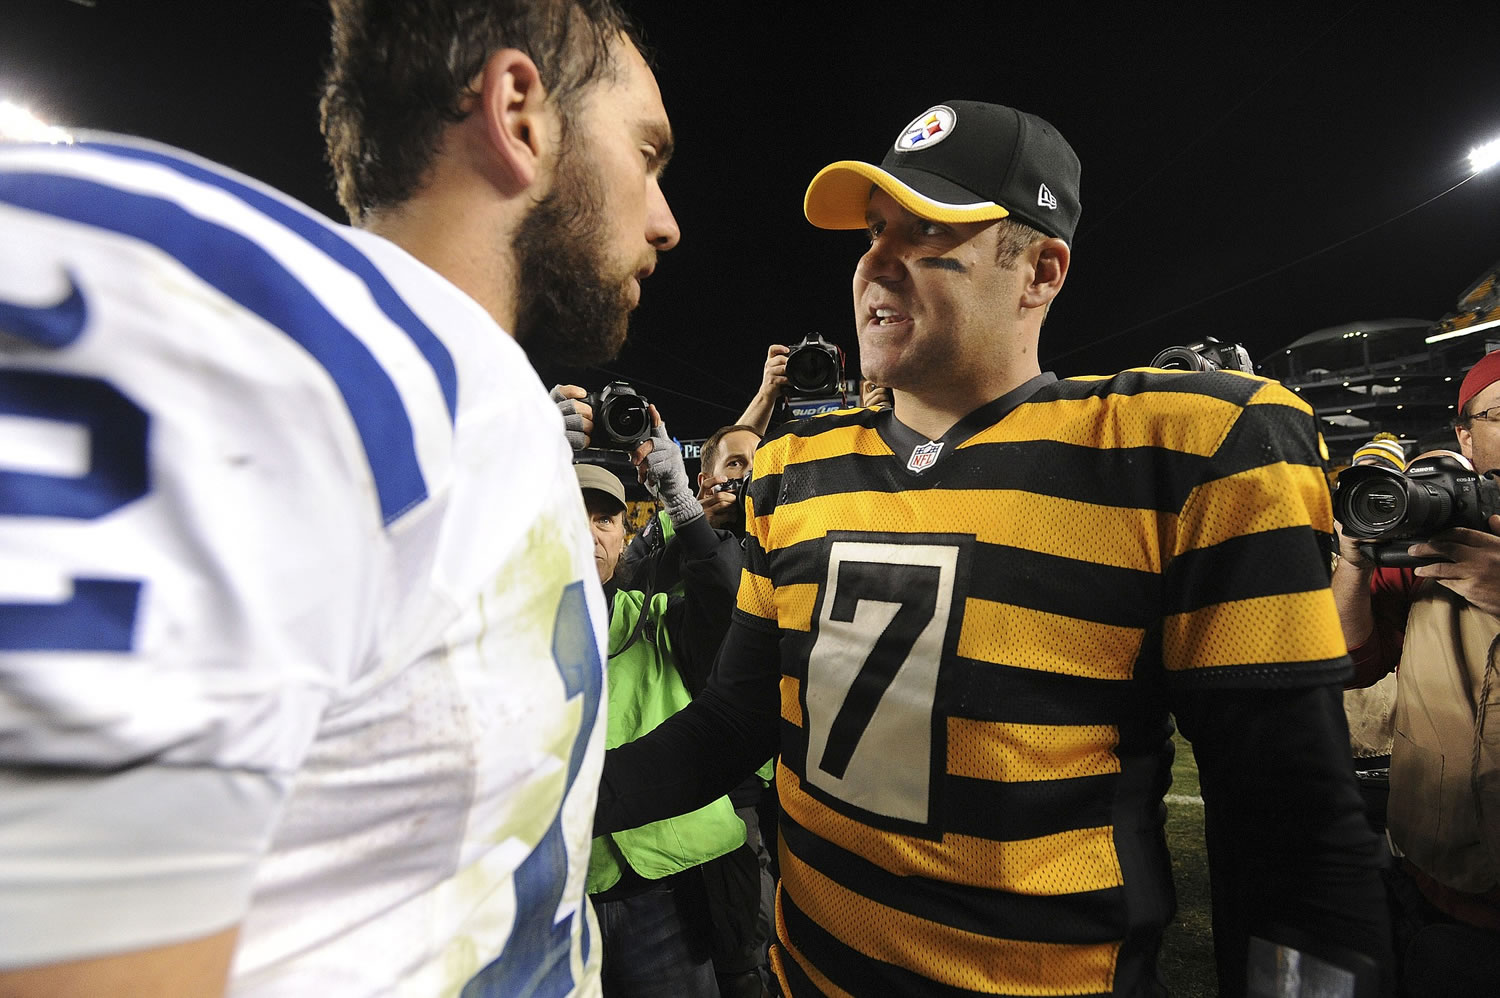 Indianapolis Colts quarterback Andrew Luck, left, greets Pittsburgh Steelers quarterback Ben Roethlisberger (7) following an NFL football game on Sunday, Oct. 26, 2014, in Pittsburgh. Pittsburgh won 51-34.